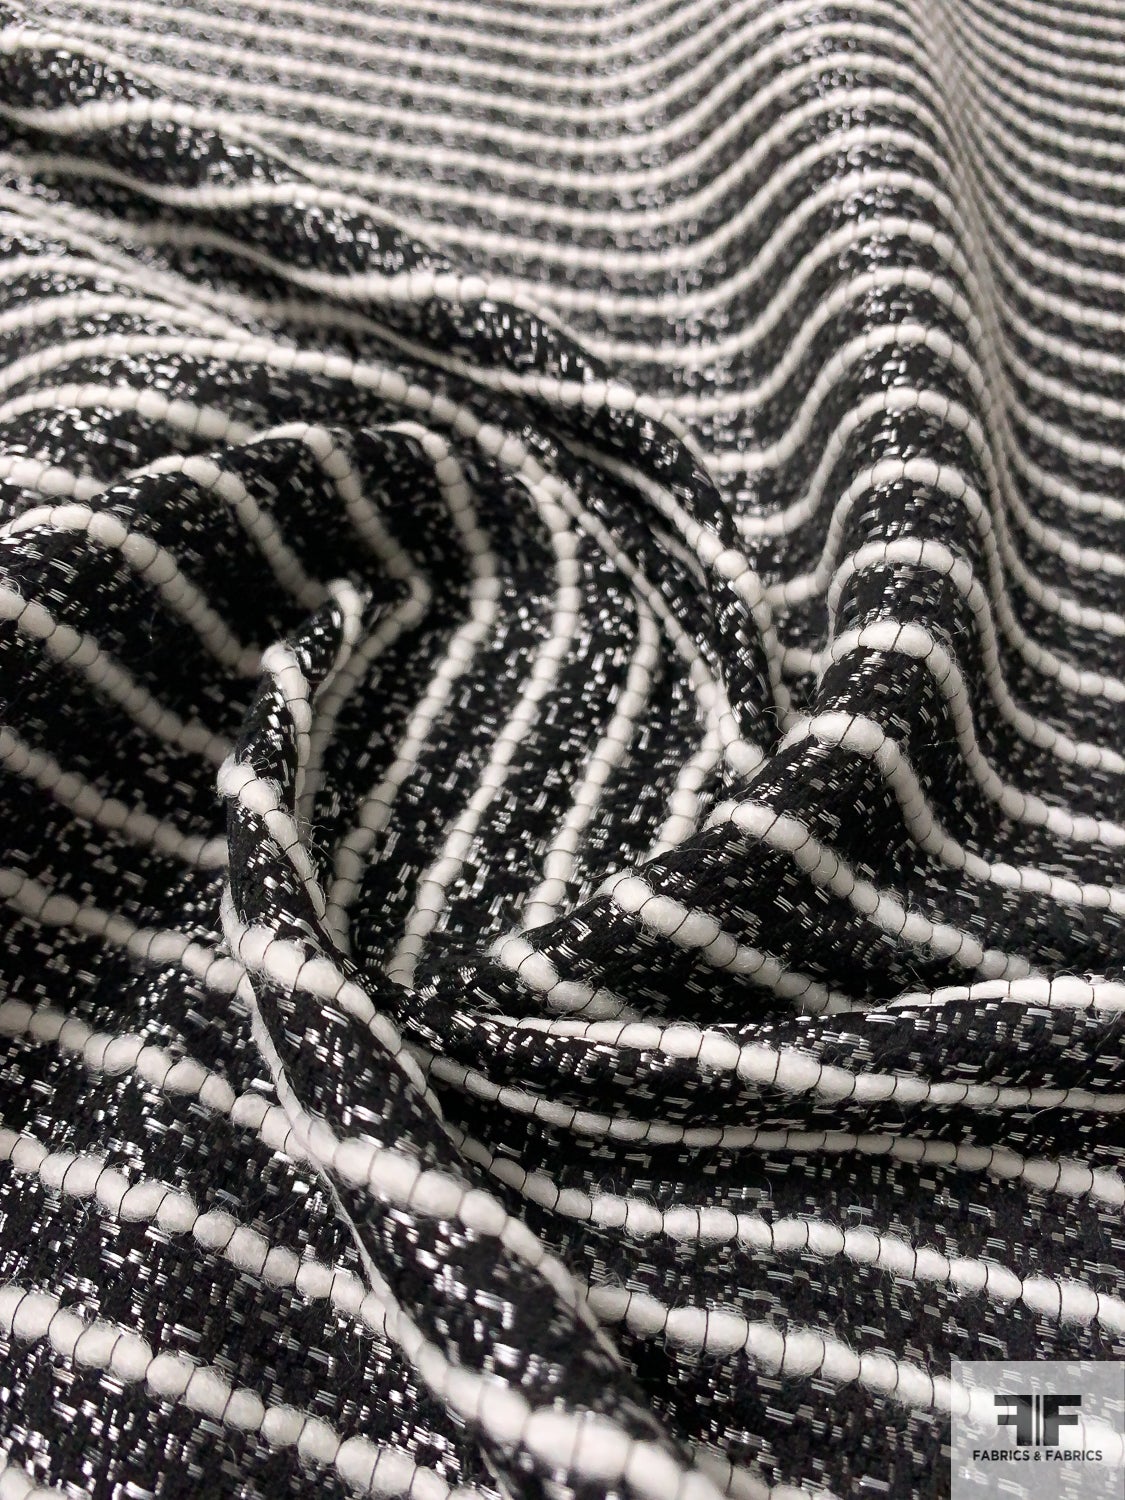 black and white striped knit fabric